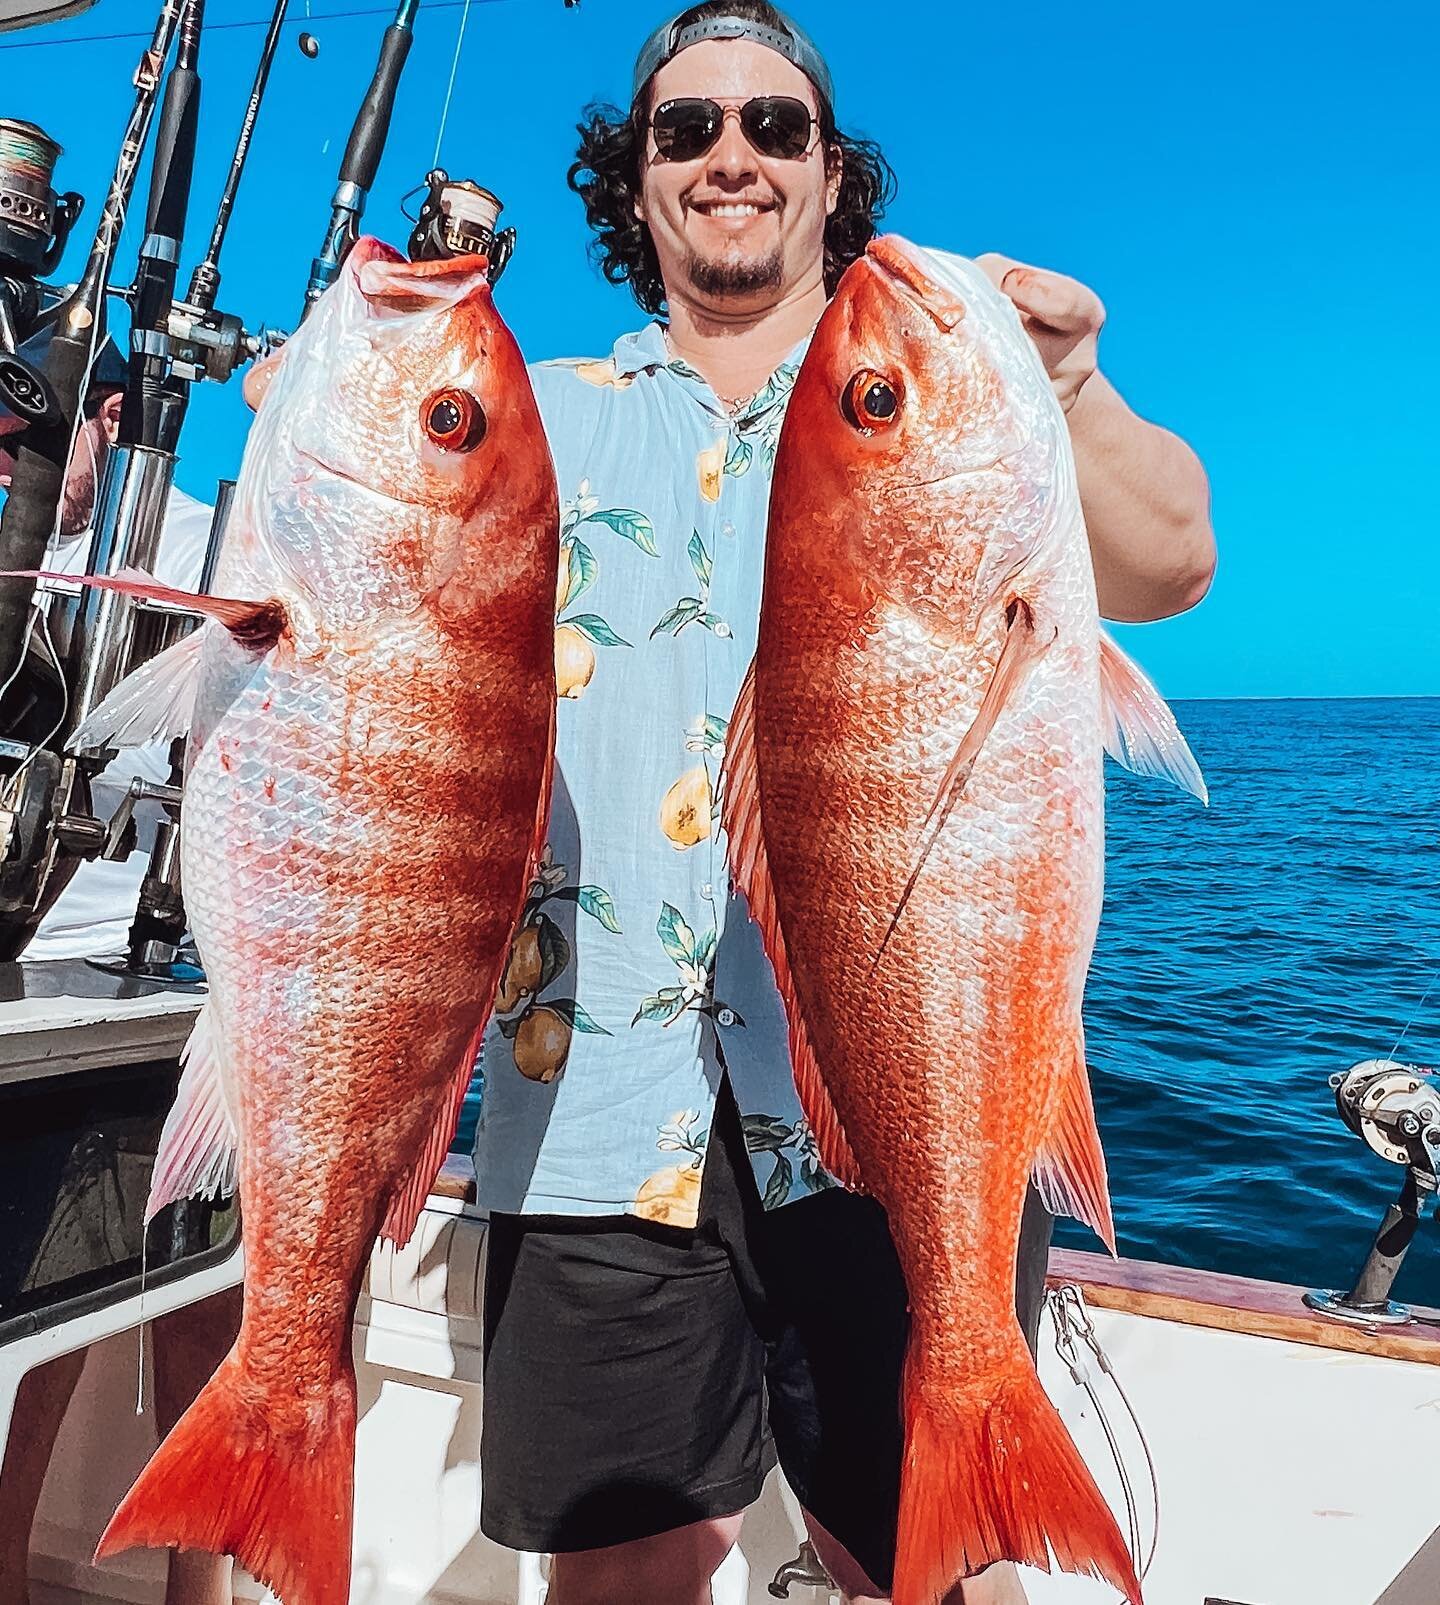 Reef fishing has been pretty awesome last weekend !🎣🎣🎣 Very nice size red snappers and the tuna mackerels were out to play !!! 🐟 the start of a great day with @anthony_bonett &amp; @william_bonett 

#redsnapper #pargo #fishing #reeffishing #jiggi